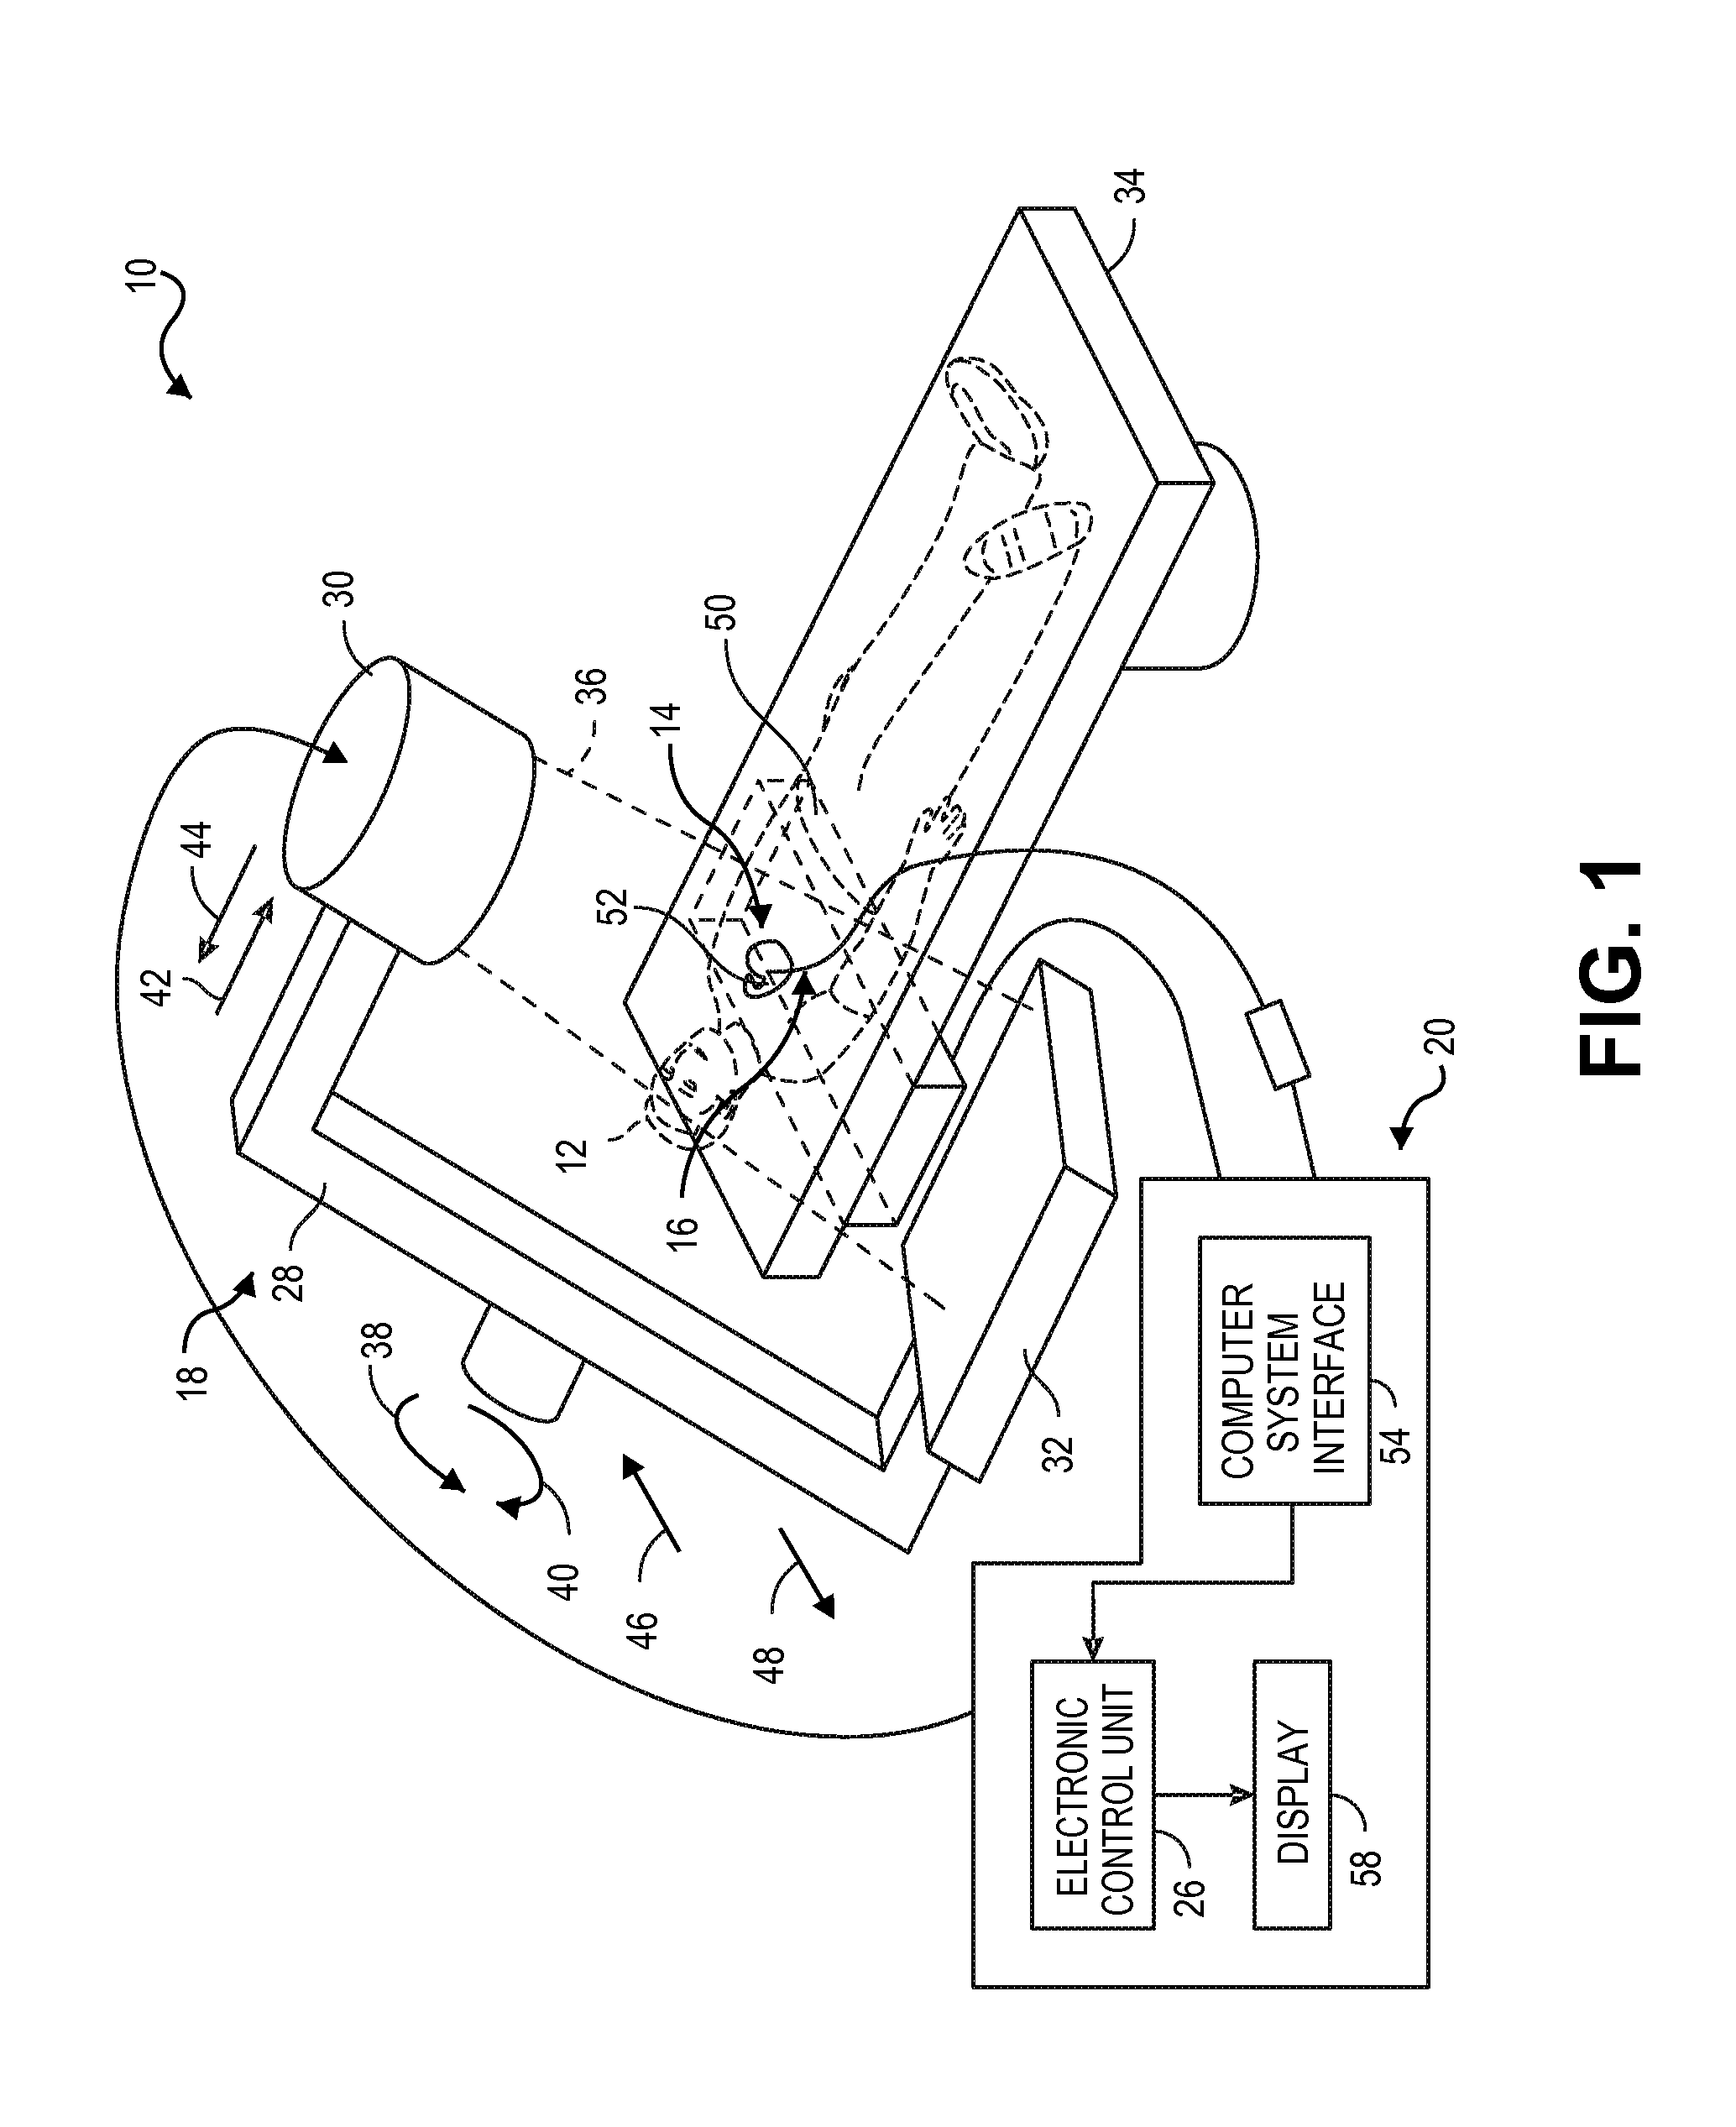 Method and system to measure cardiac motion using a cardiovascular navigation system